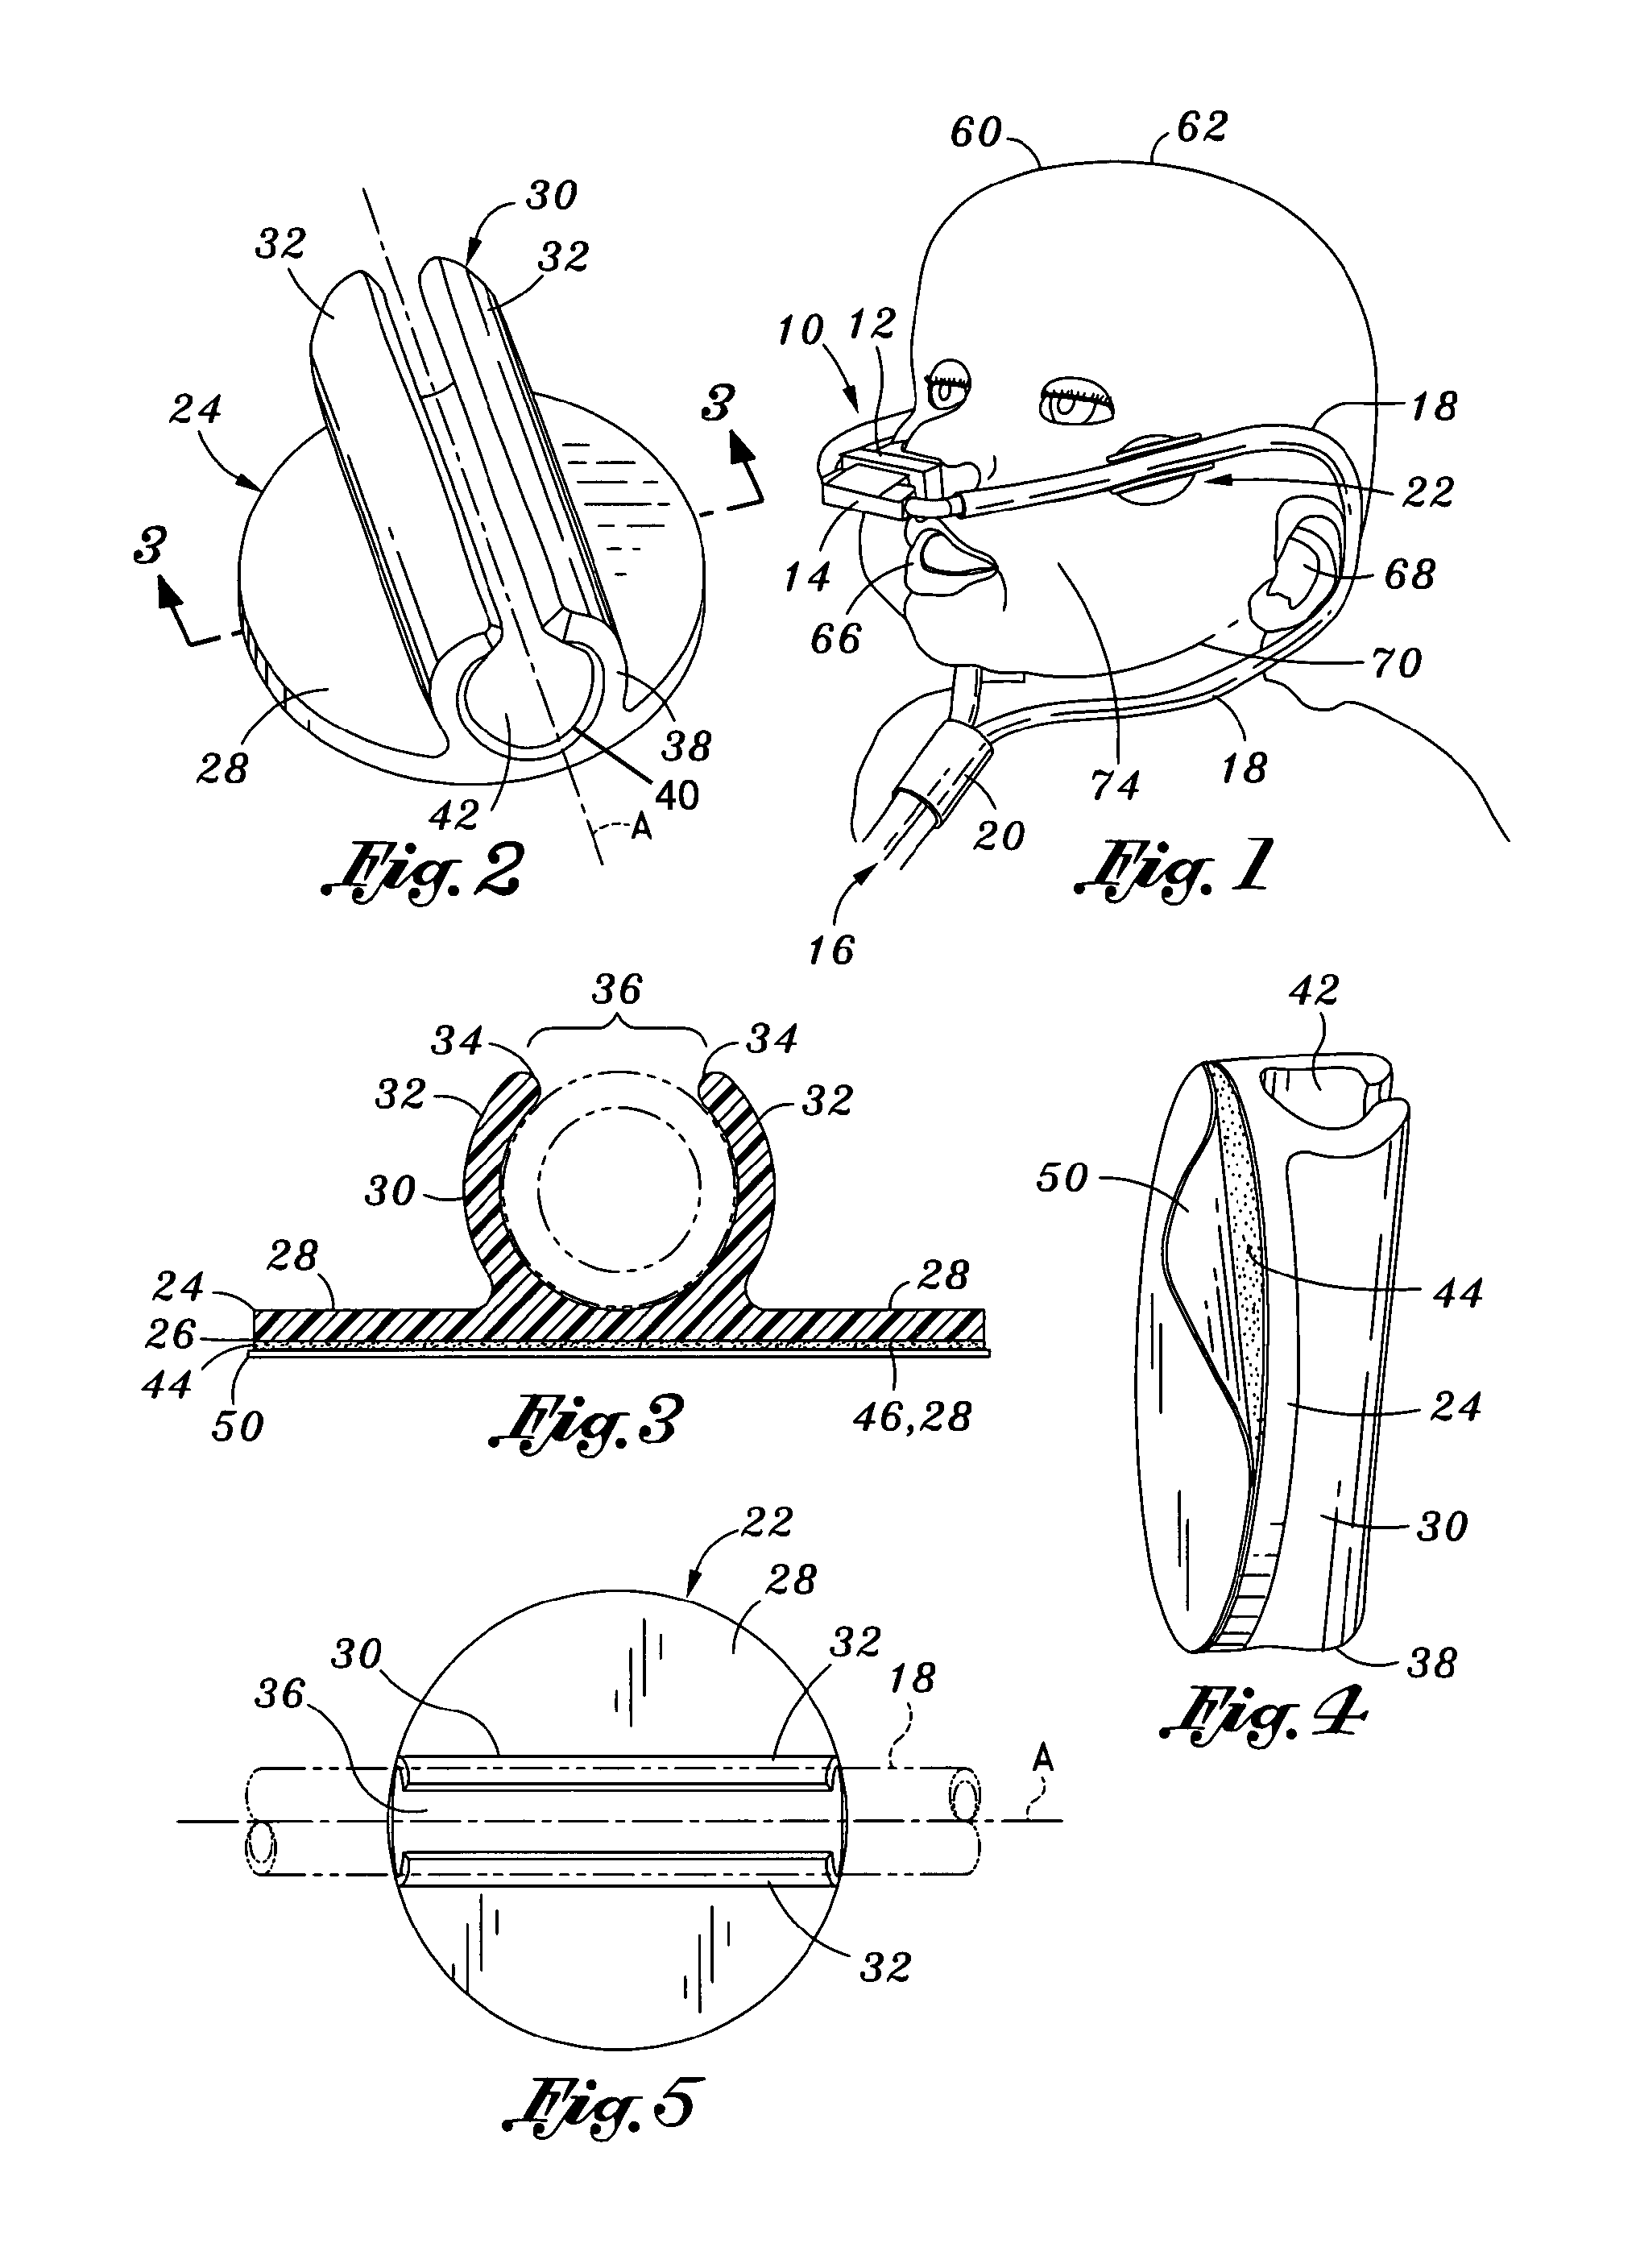 Retainer clip for securing breathing devices